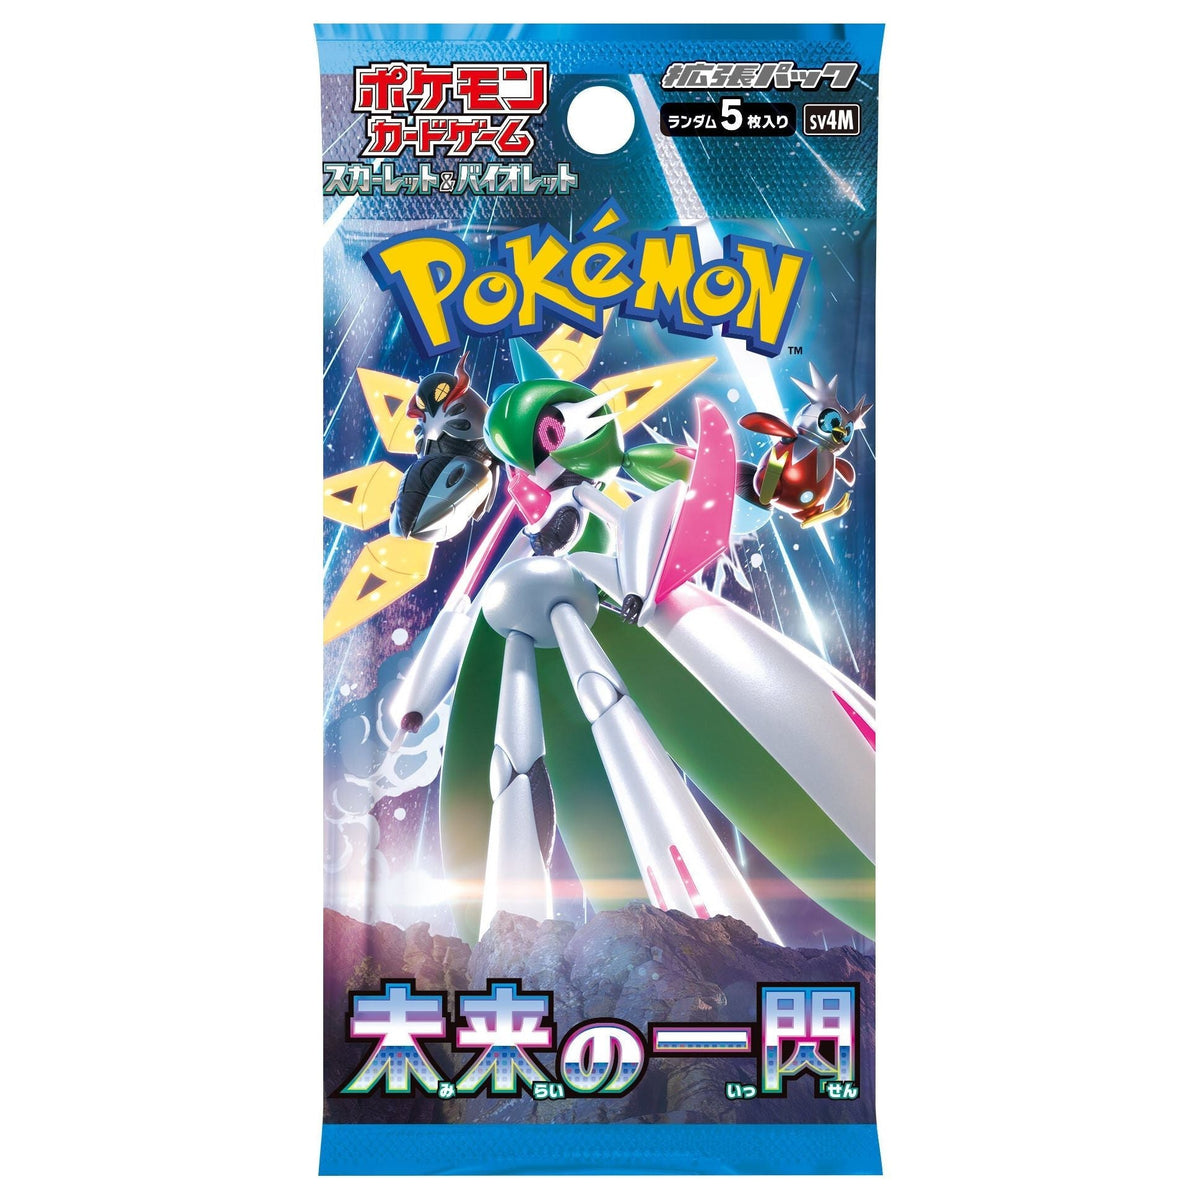 Future Flash Booster Booster Pack SV4M (Japanese Pokemon)